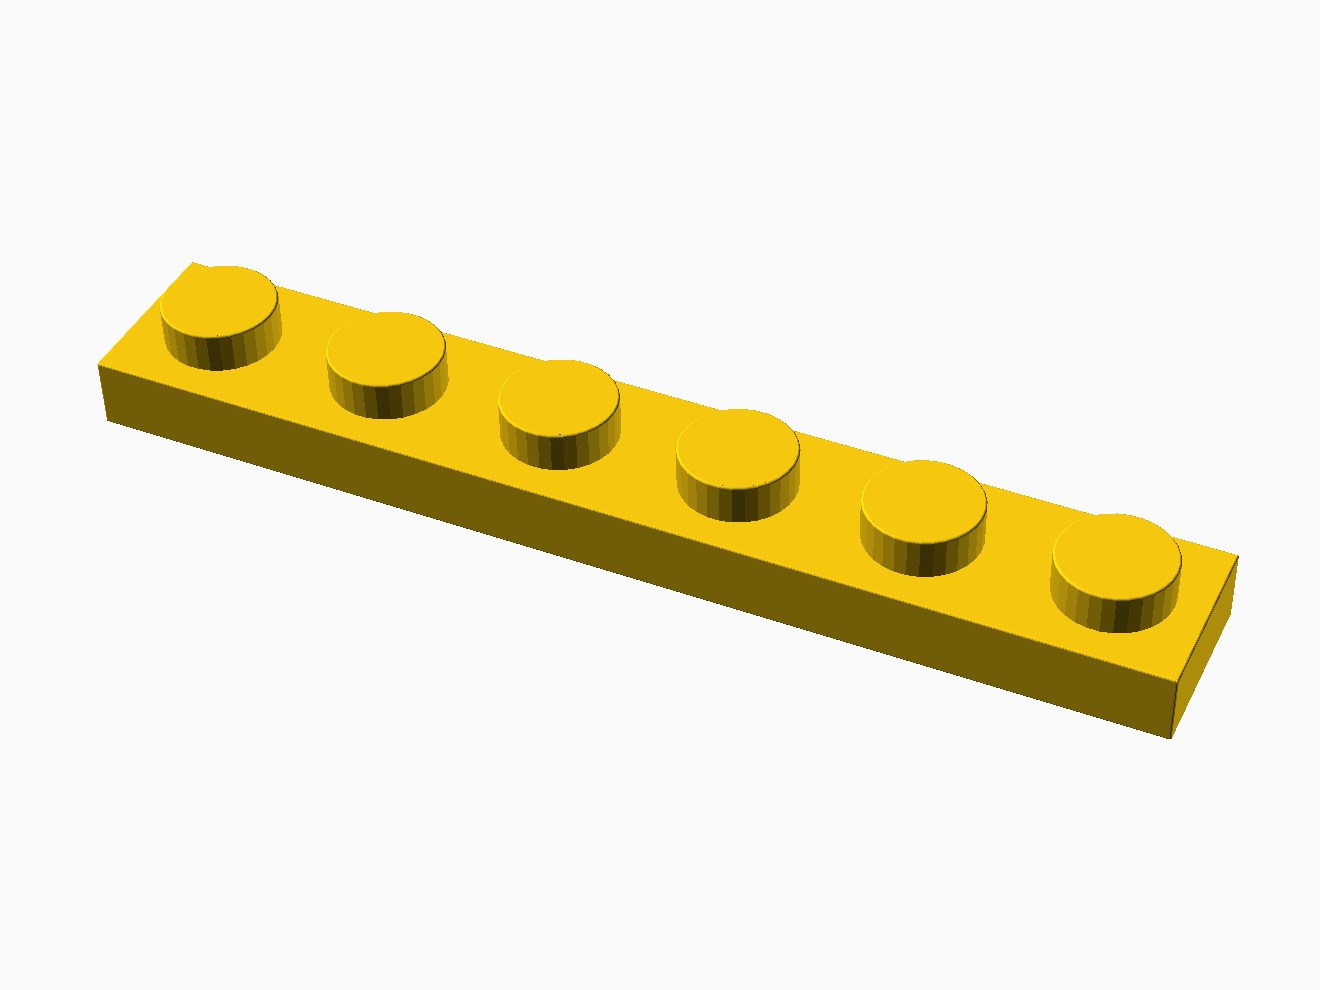 3D printable model of a LEGO 6x1 Plate with standard knobs.